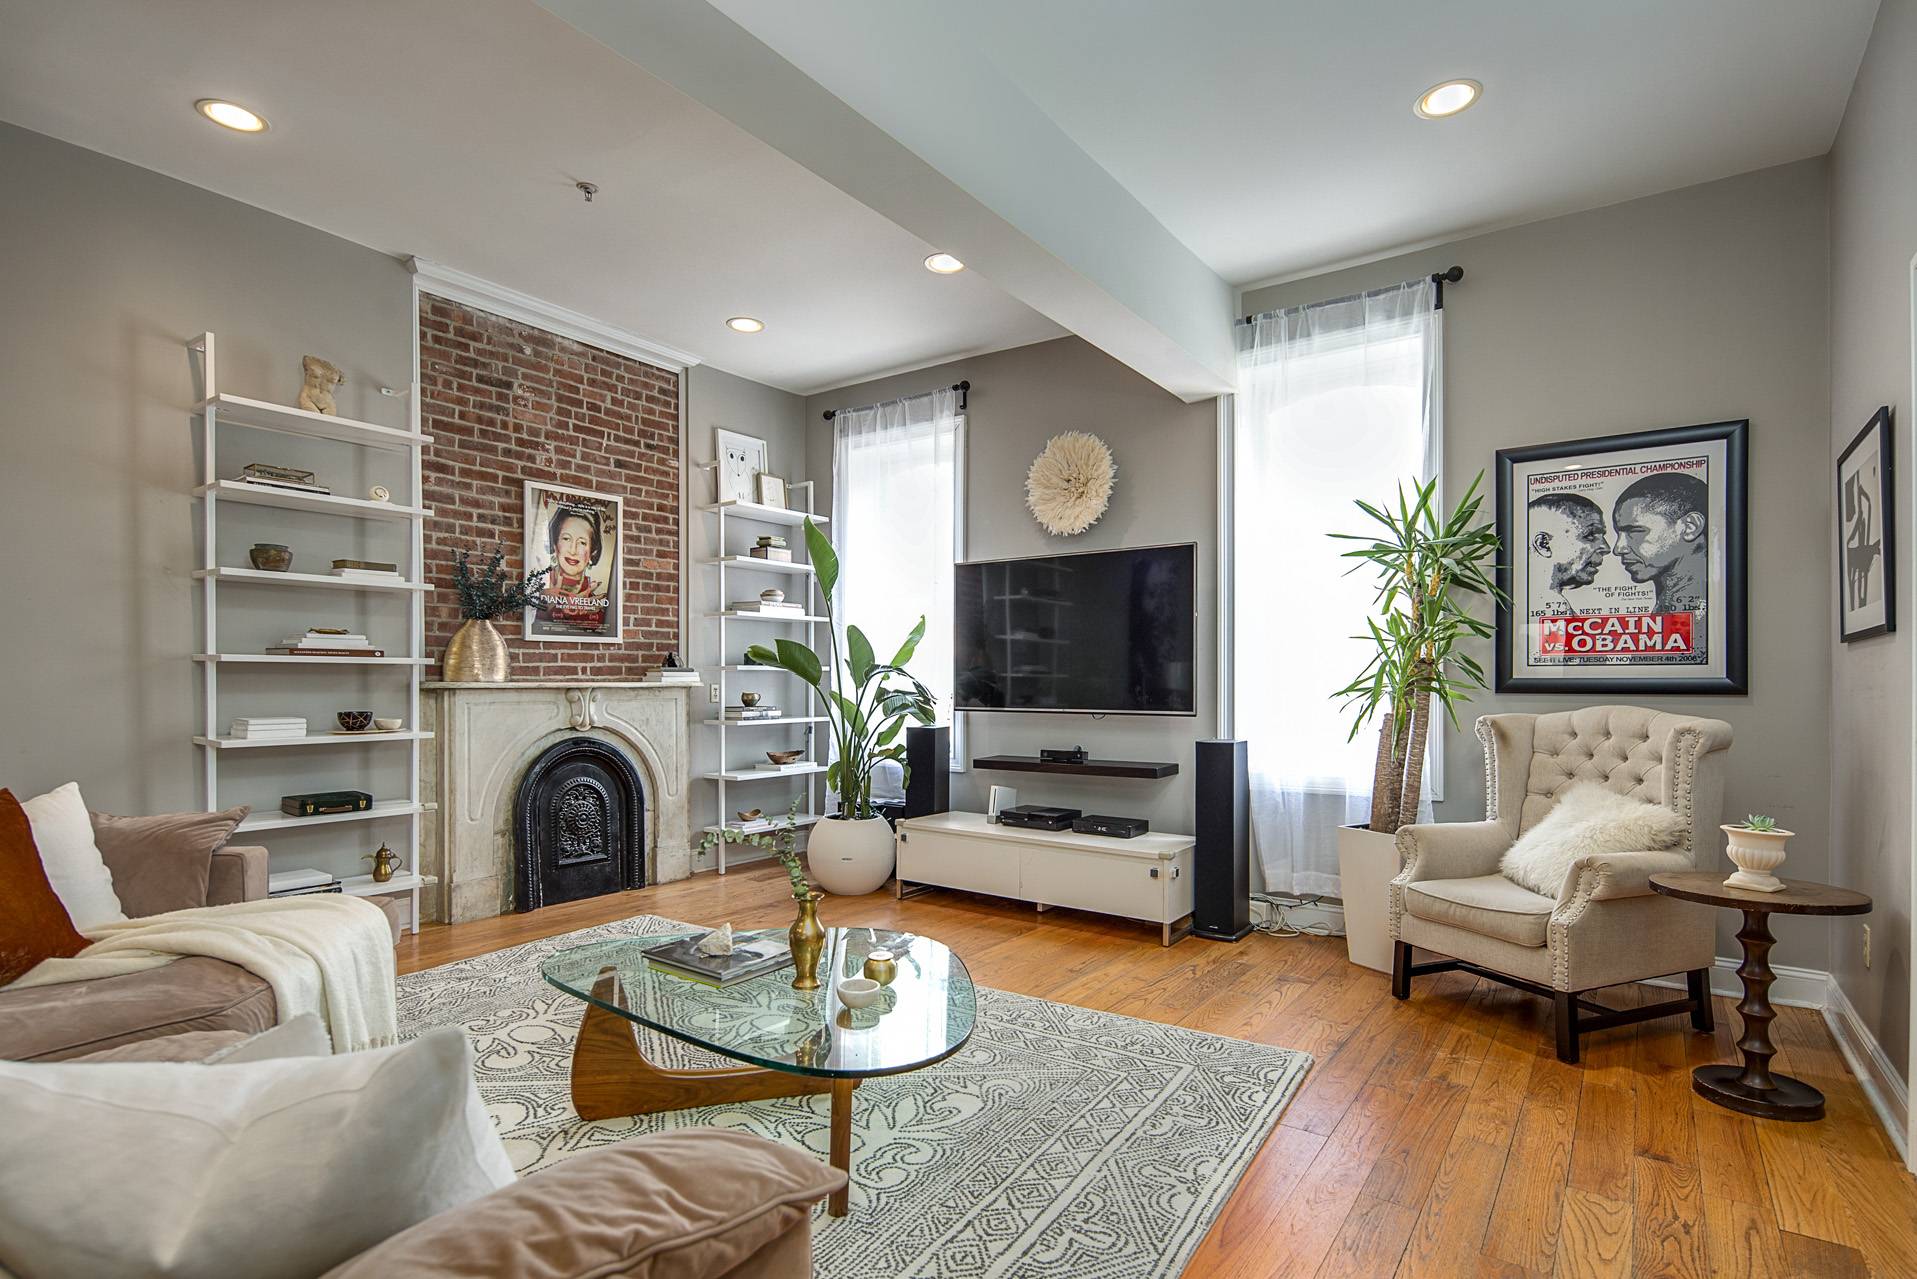 Open Concept 2 Bed/2.5 Bath Duplex Condo in Classic Downtown Jersey City Brick and Brownstone Townhouse